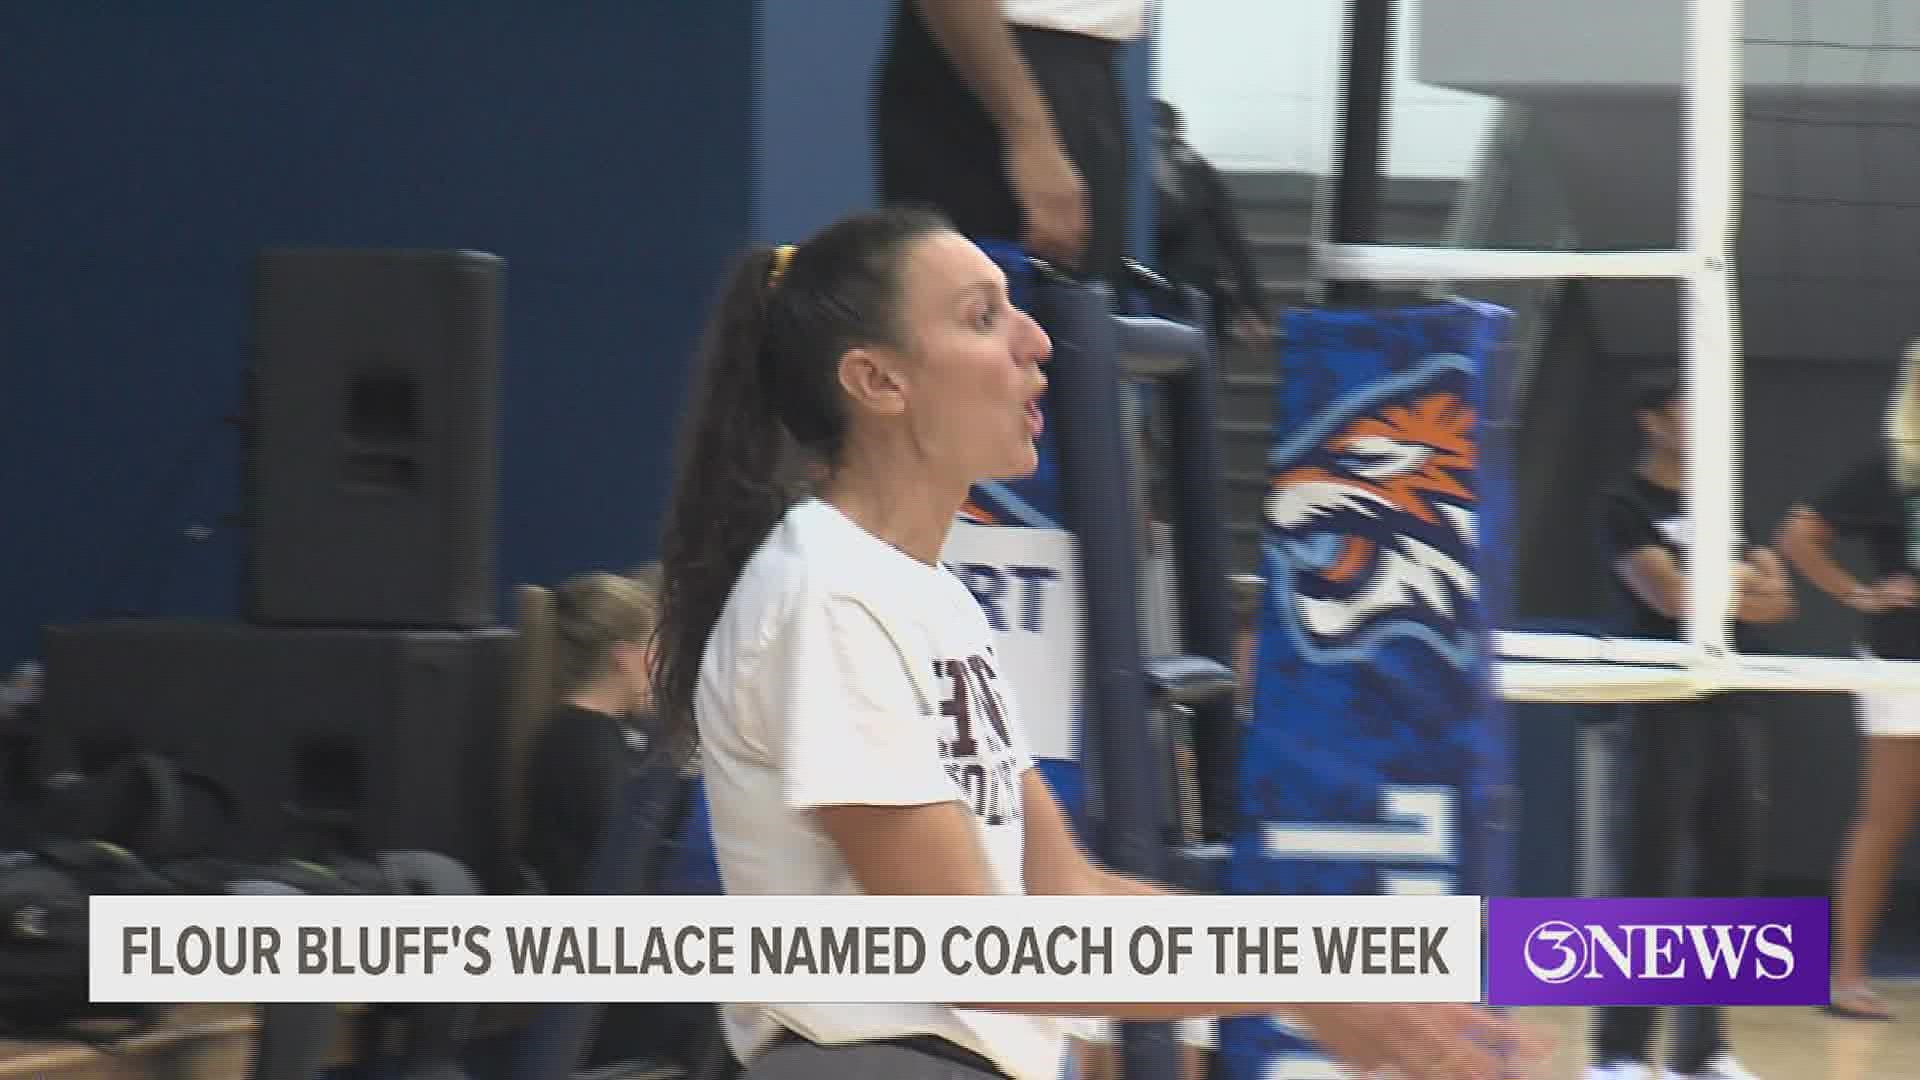 Volleyball Insiders named Kara Wallace the Coach of the Week for the state after the Hornets' hot start to the 2022 season.